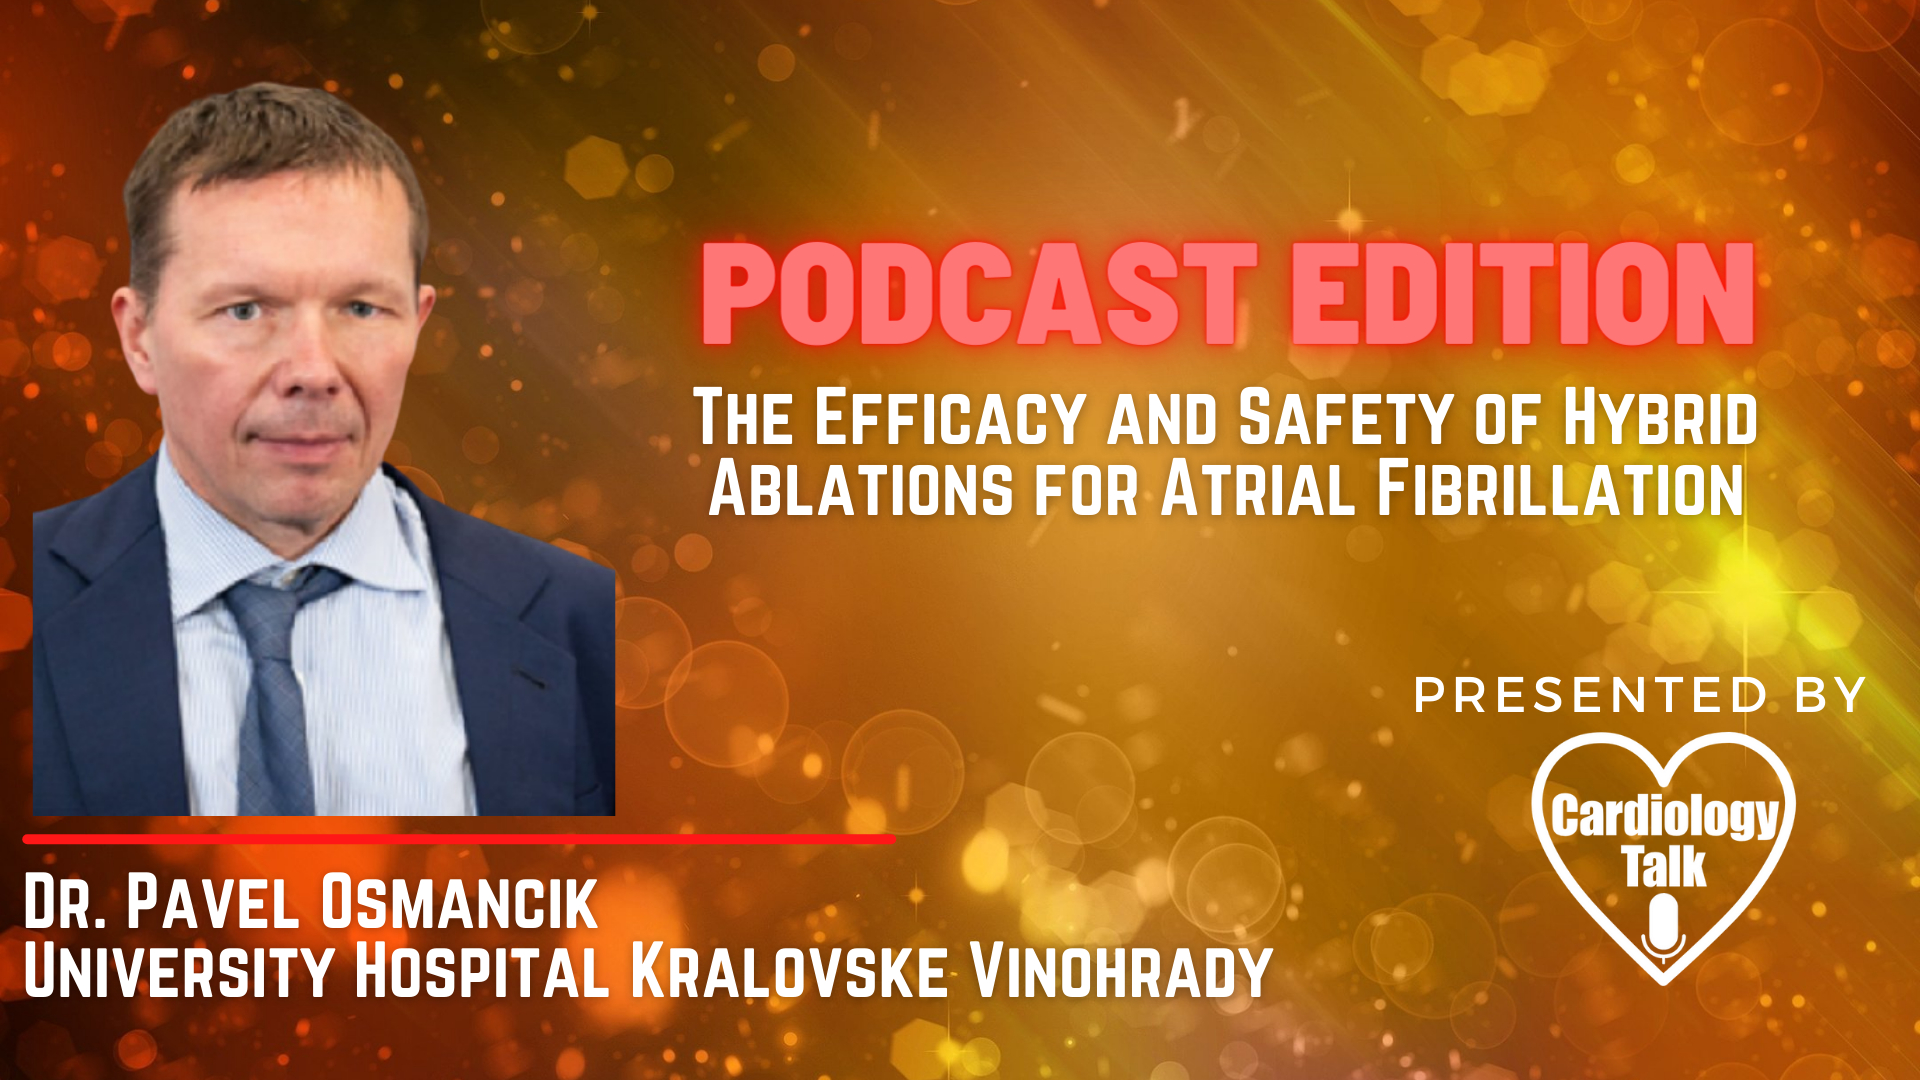 Dr. Pavel Osmancik, MD- The Efficacy and Safety of Hybrid Ablations for Atrial Fibrillation